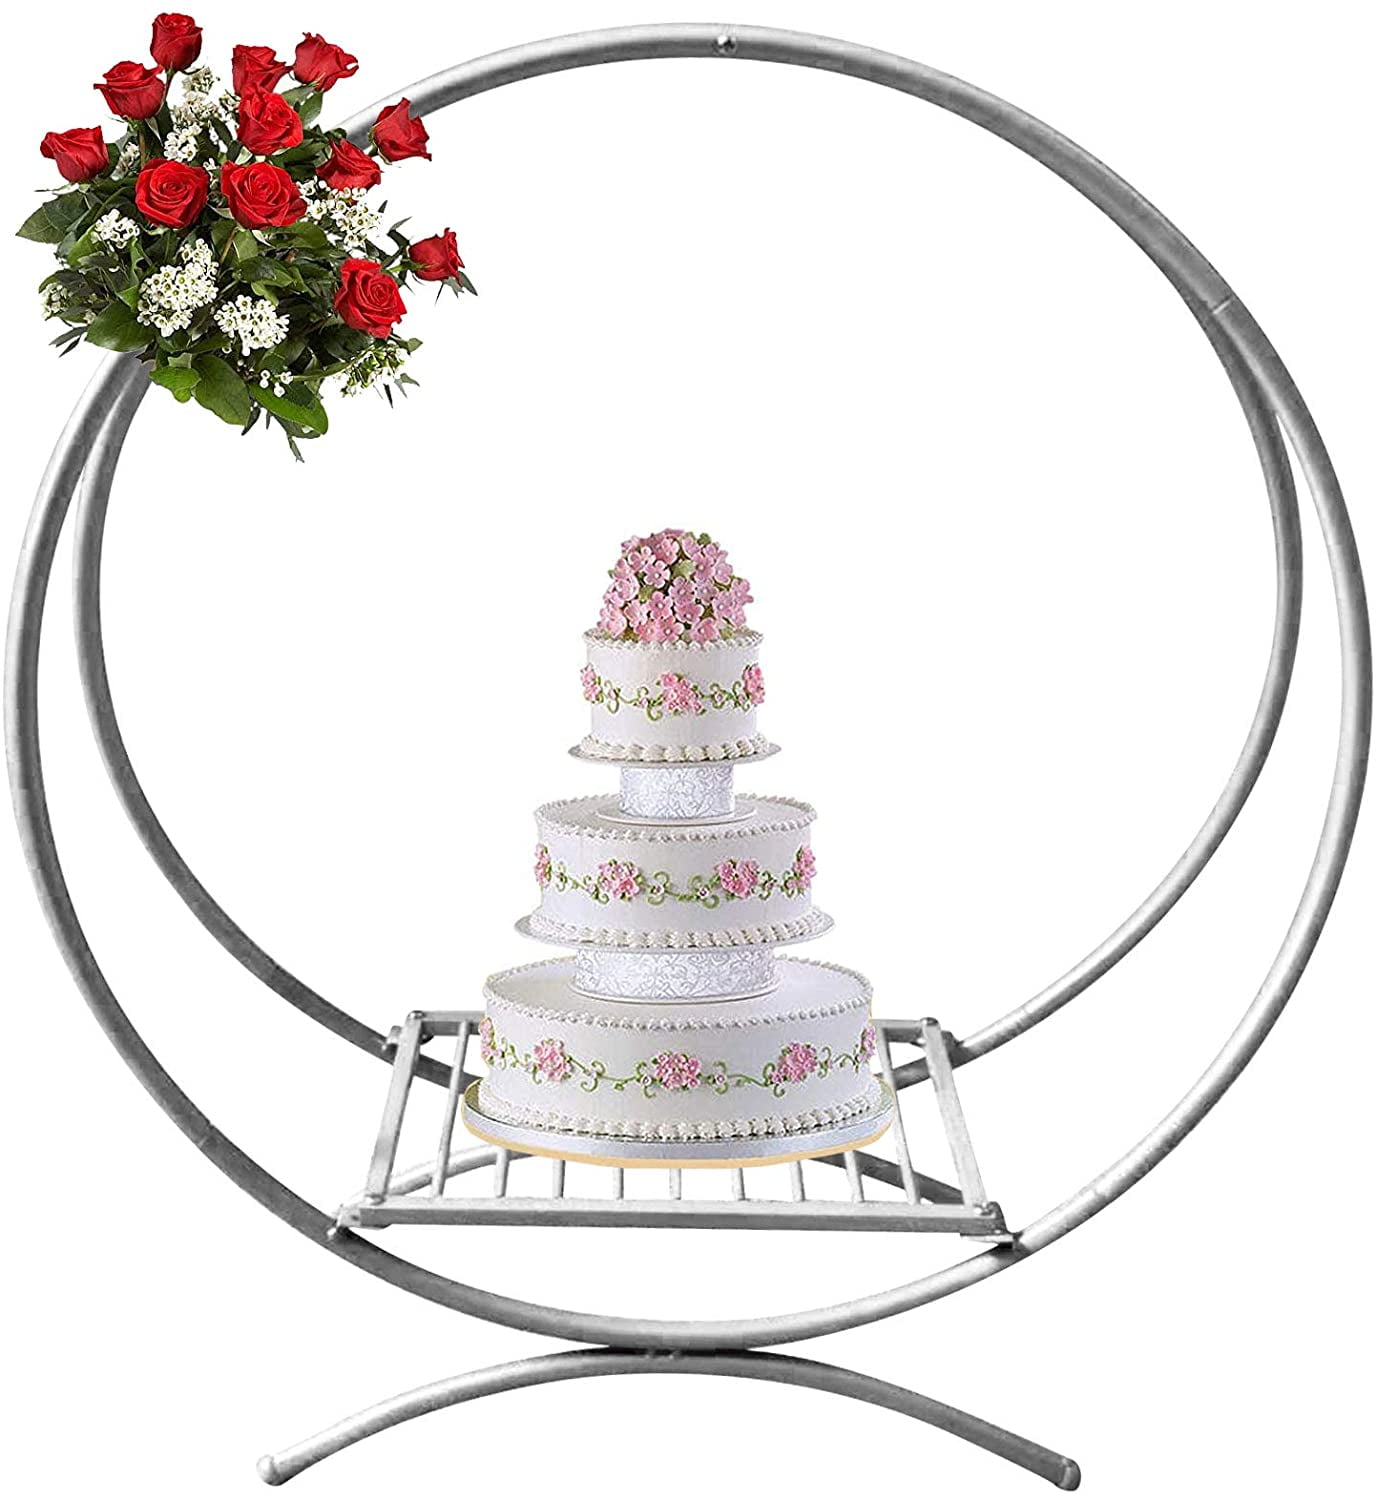 Metal Garden Gates Frame Flower Arch Cake Stand Backdrops For Garden  Wedding, Birthday Party, Baptism, Dessert Table, And Grand Event Decoration  From Homeparty1314, $281.41